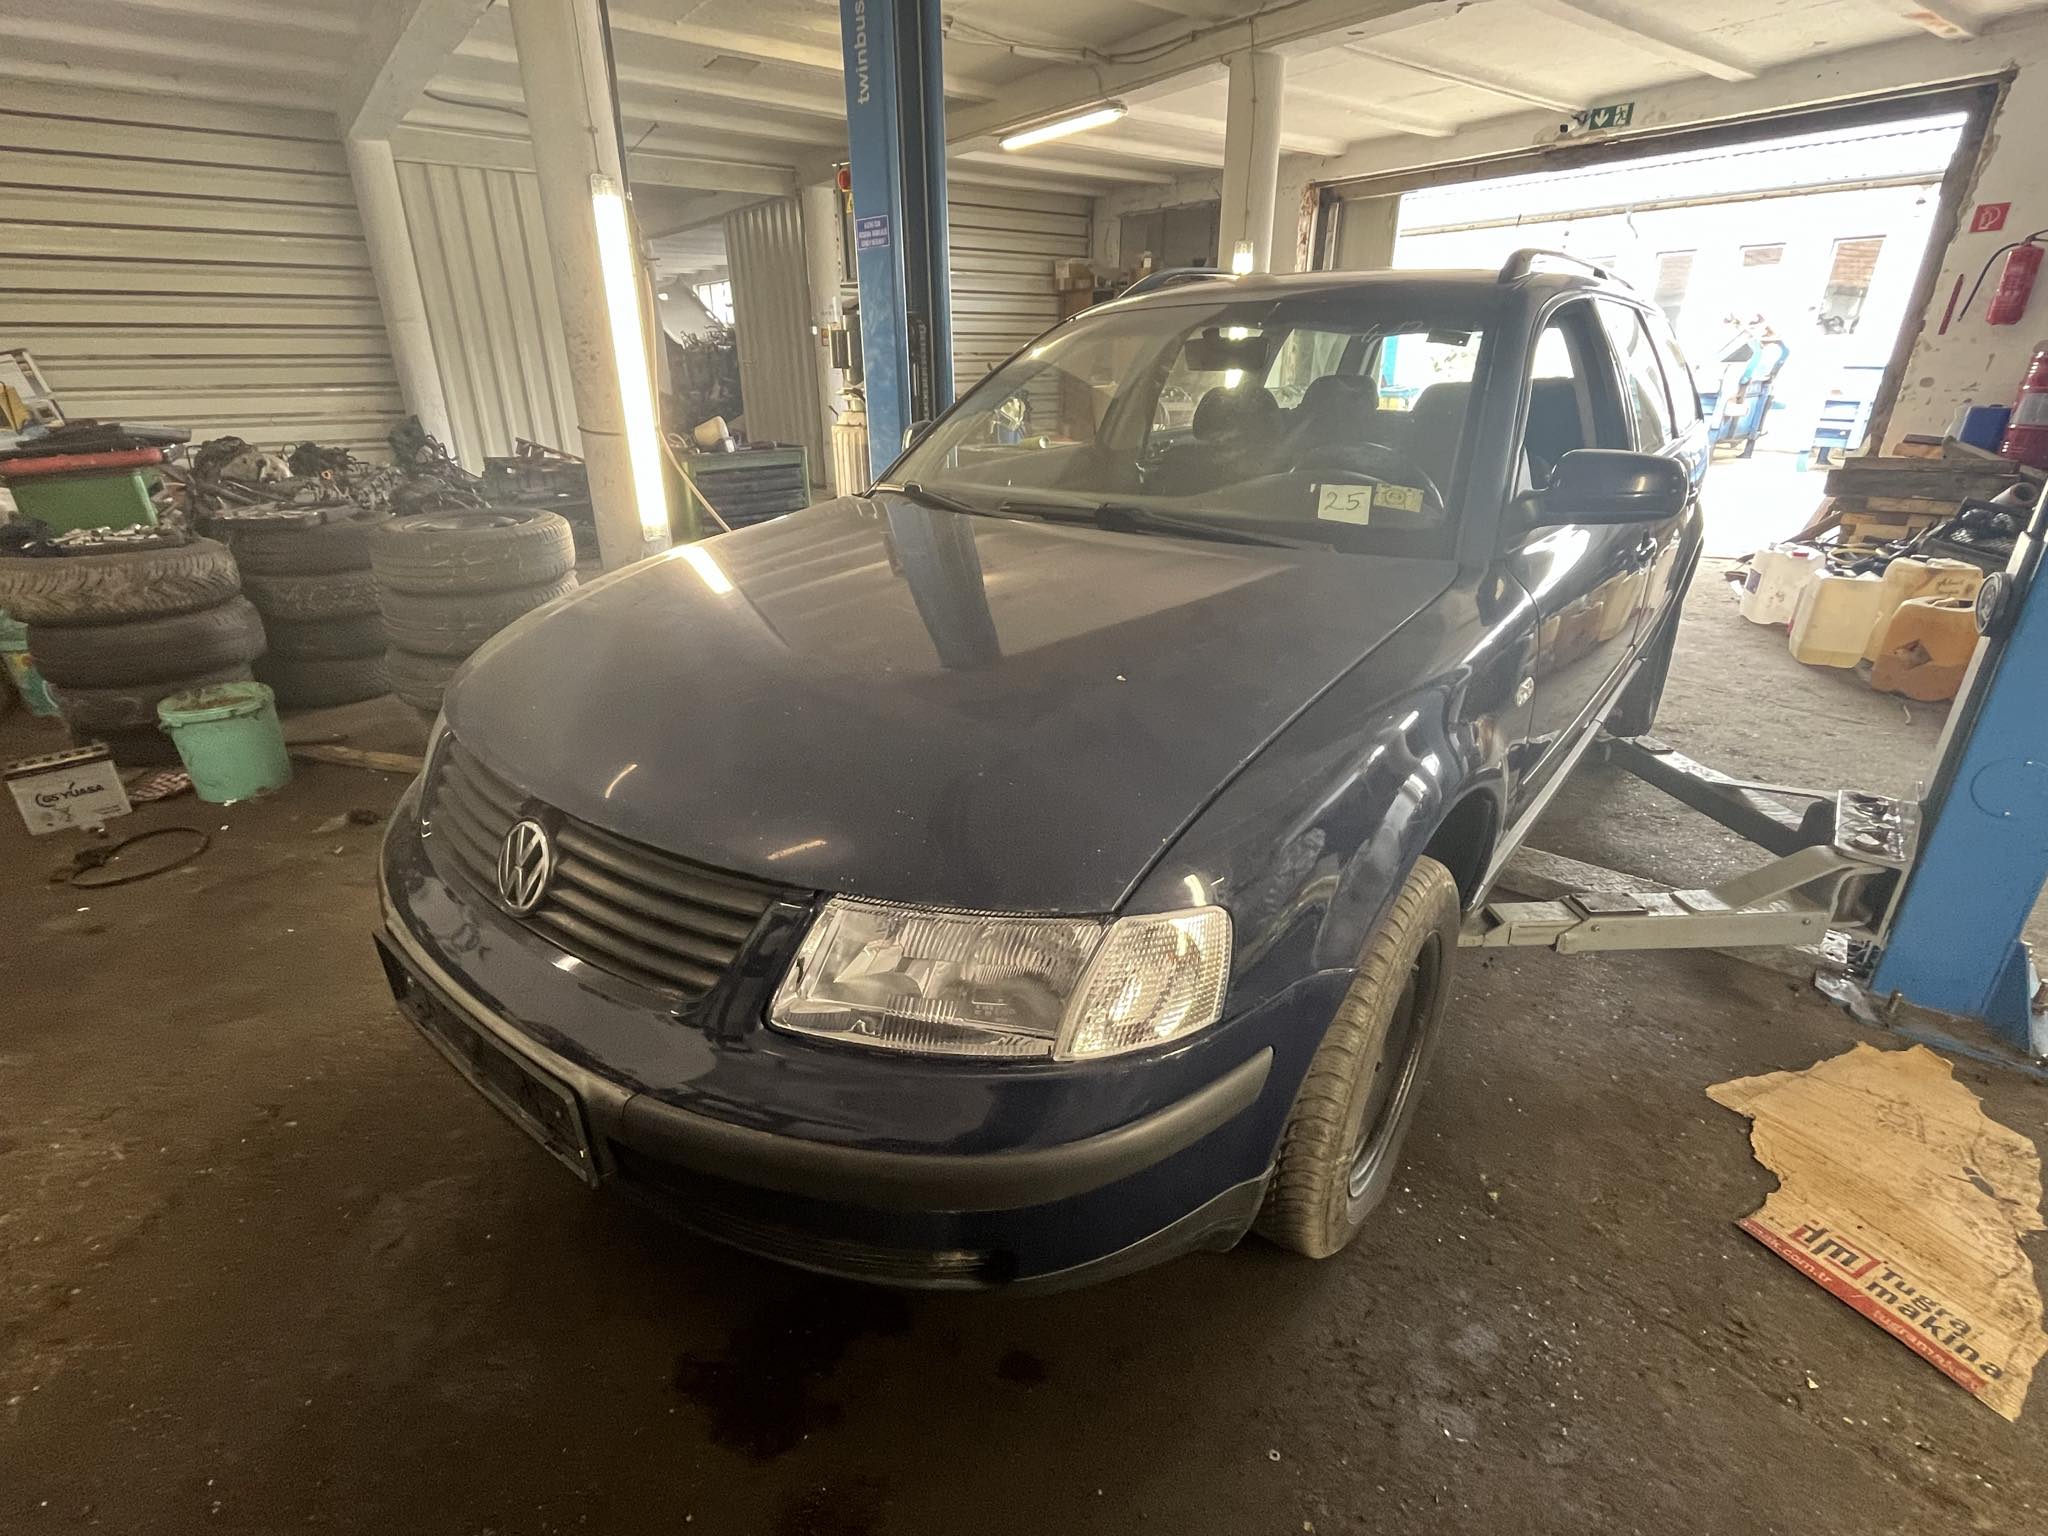 You are currently viewing 413, VolksWagen Passat